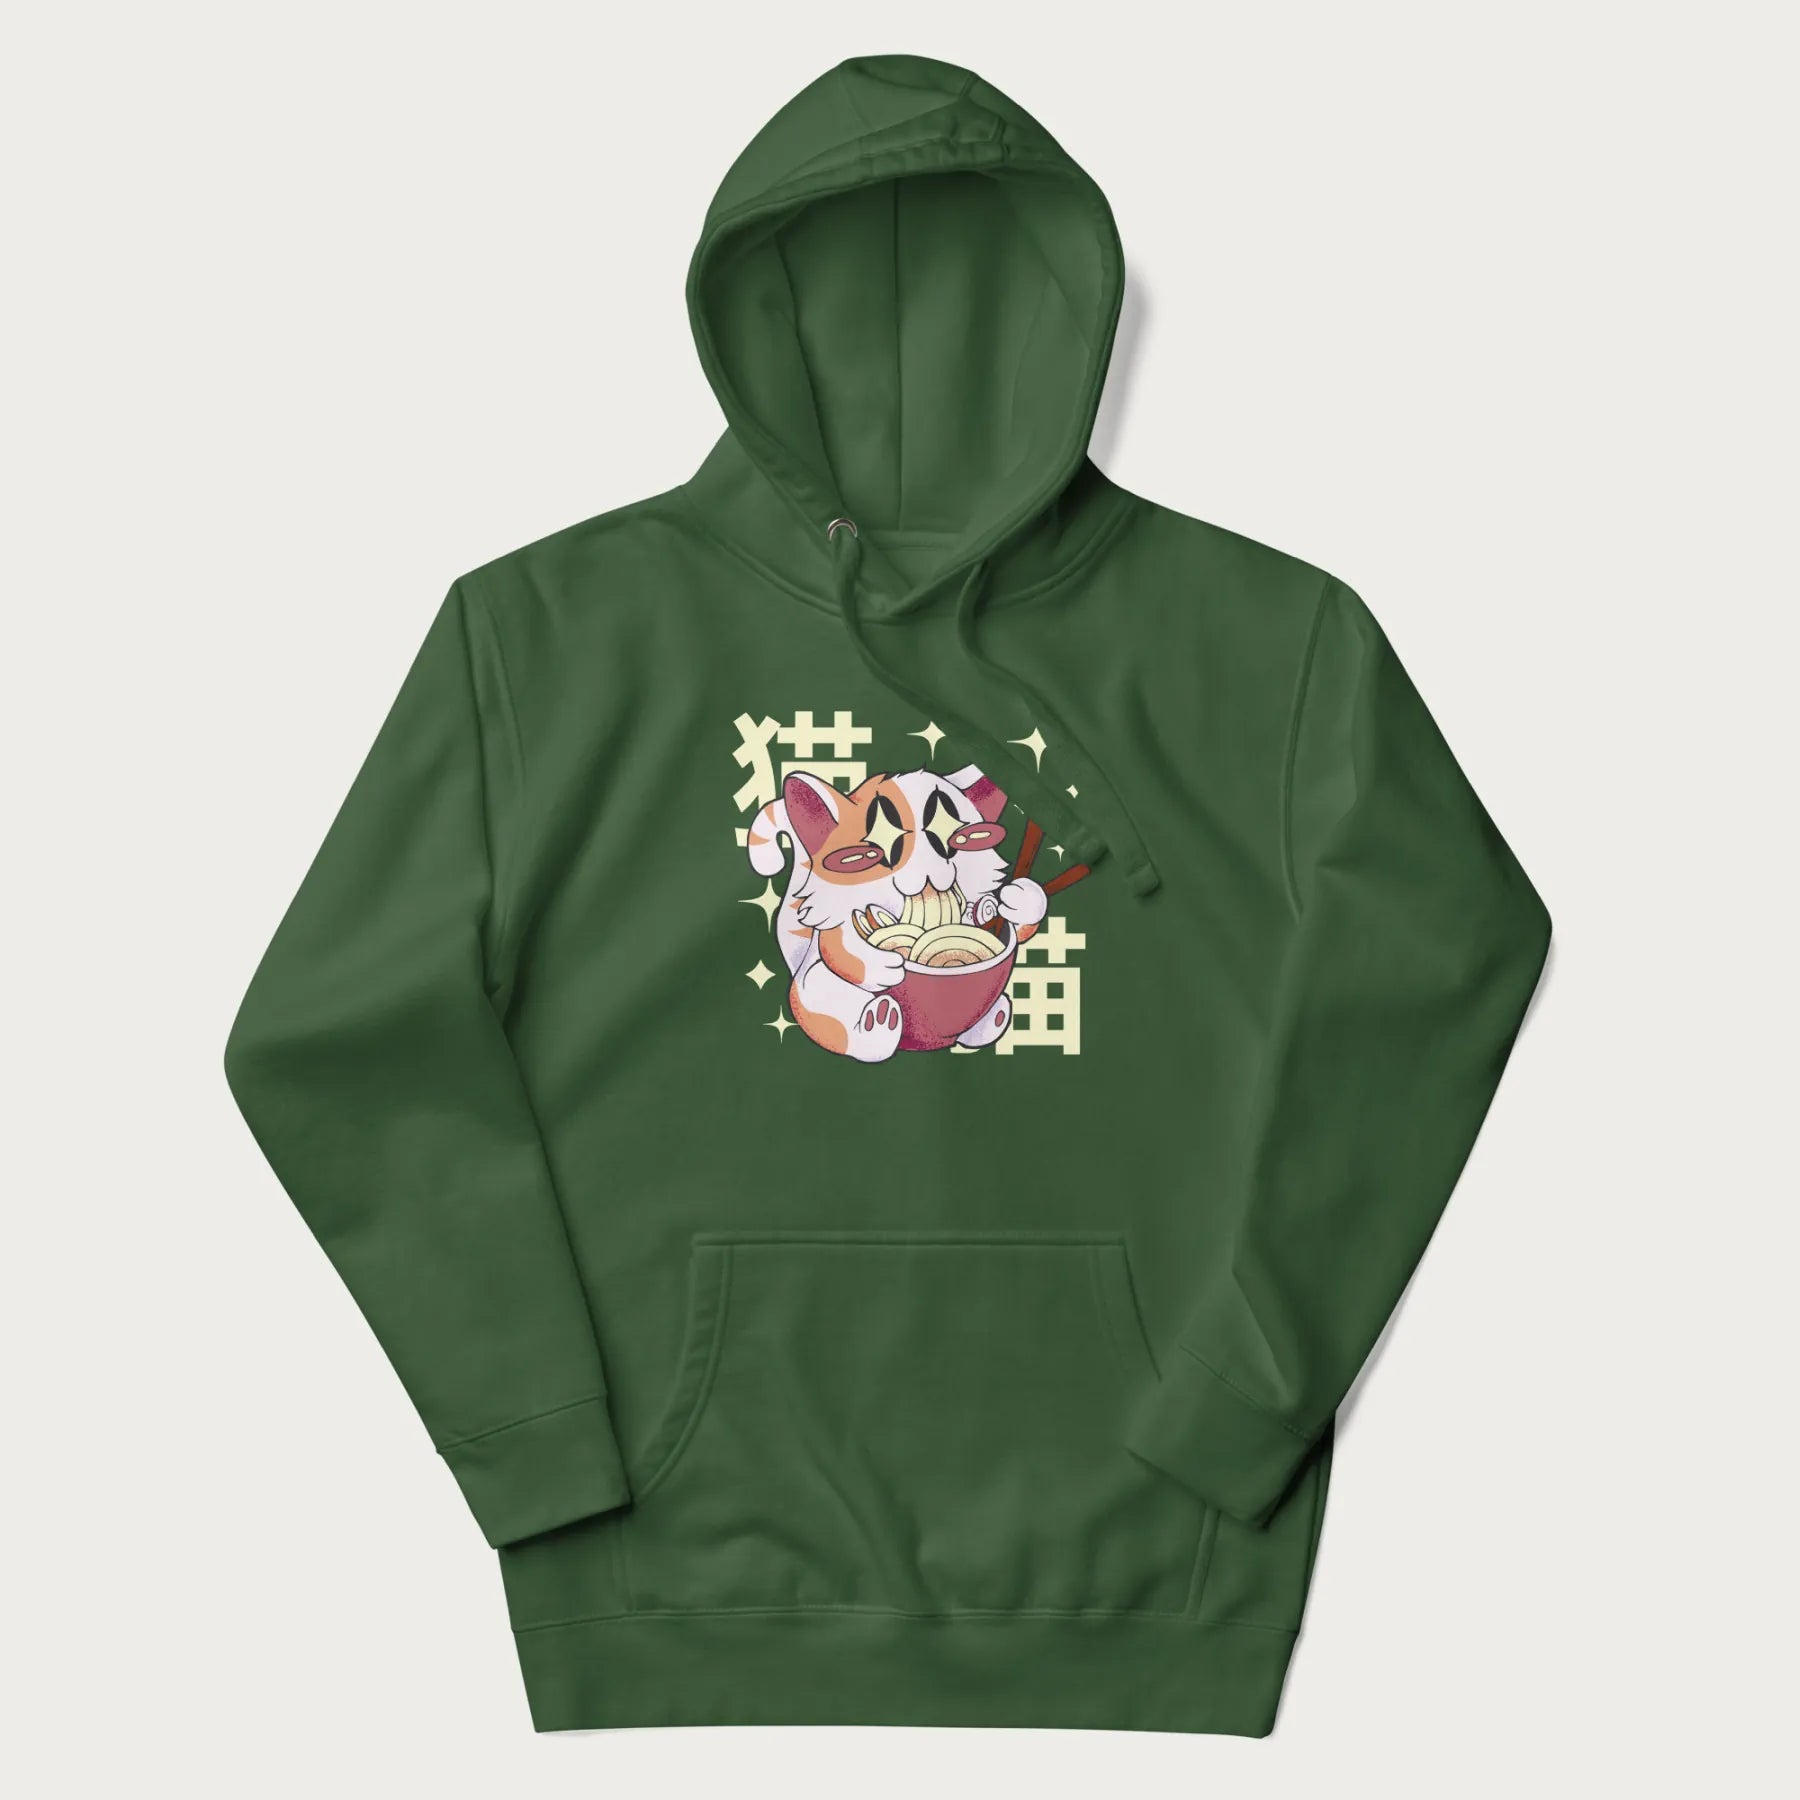 Forest green hoodie with Japanese graphic of a cat eating ramen with Japanese text '猫' in the background.